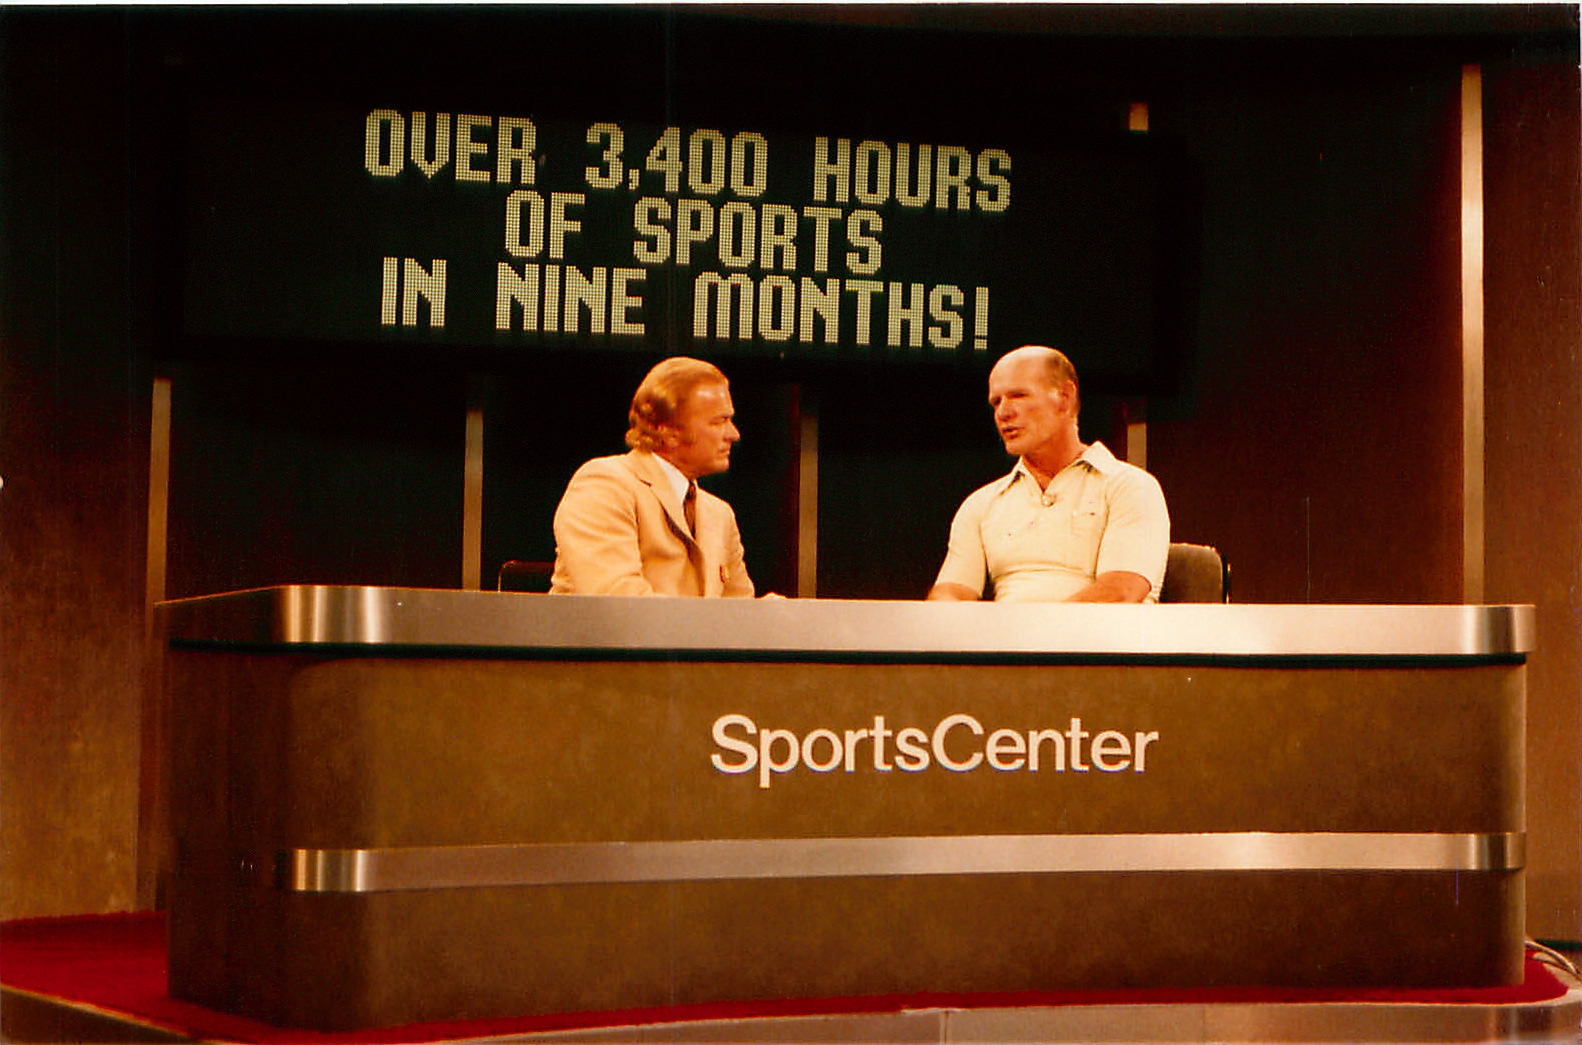 Dallas TX, May 1980: Jim Simpson (l) is shown talking with Dallas Cowboys coach Tom Landry on a SportsCenter set at the NCTA.